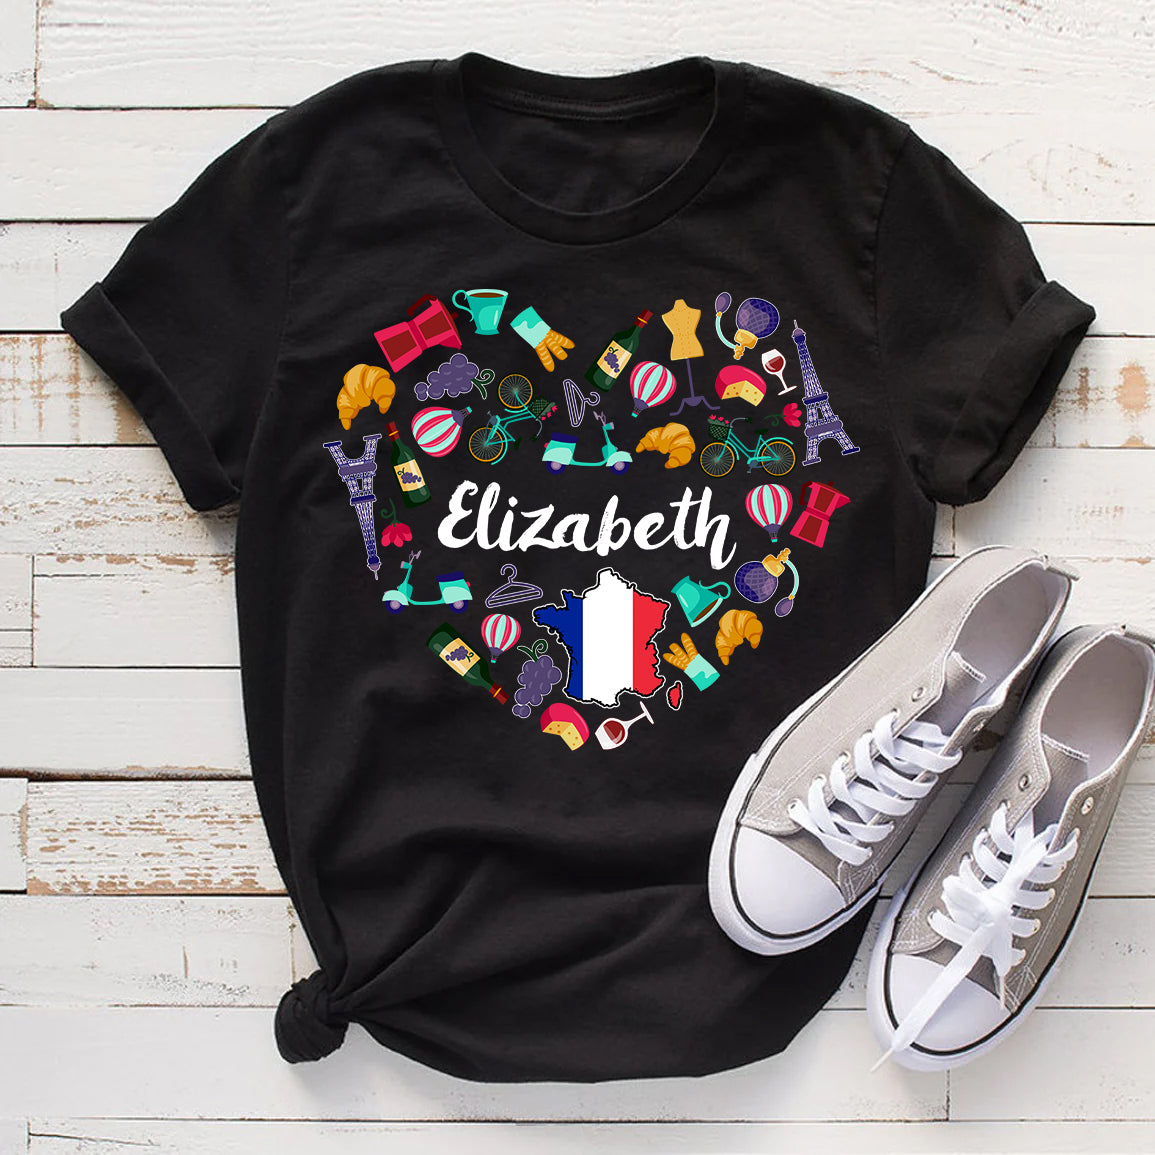 Custom France Heart T-shirt With Your Name